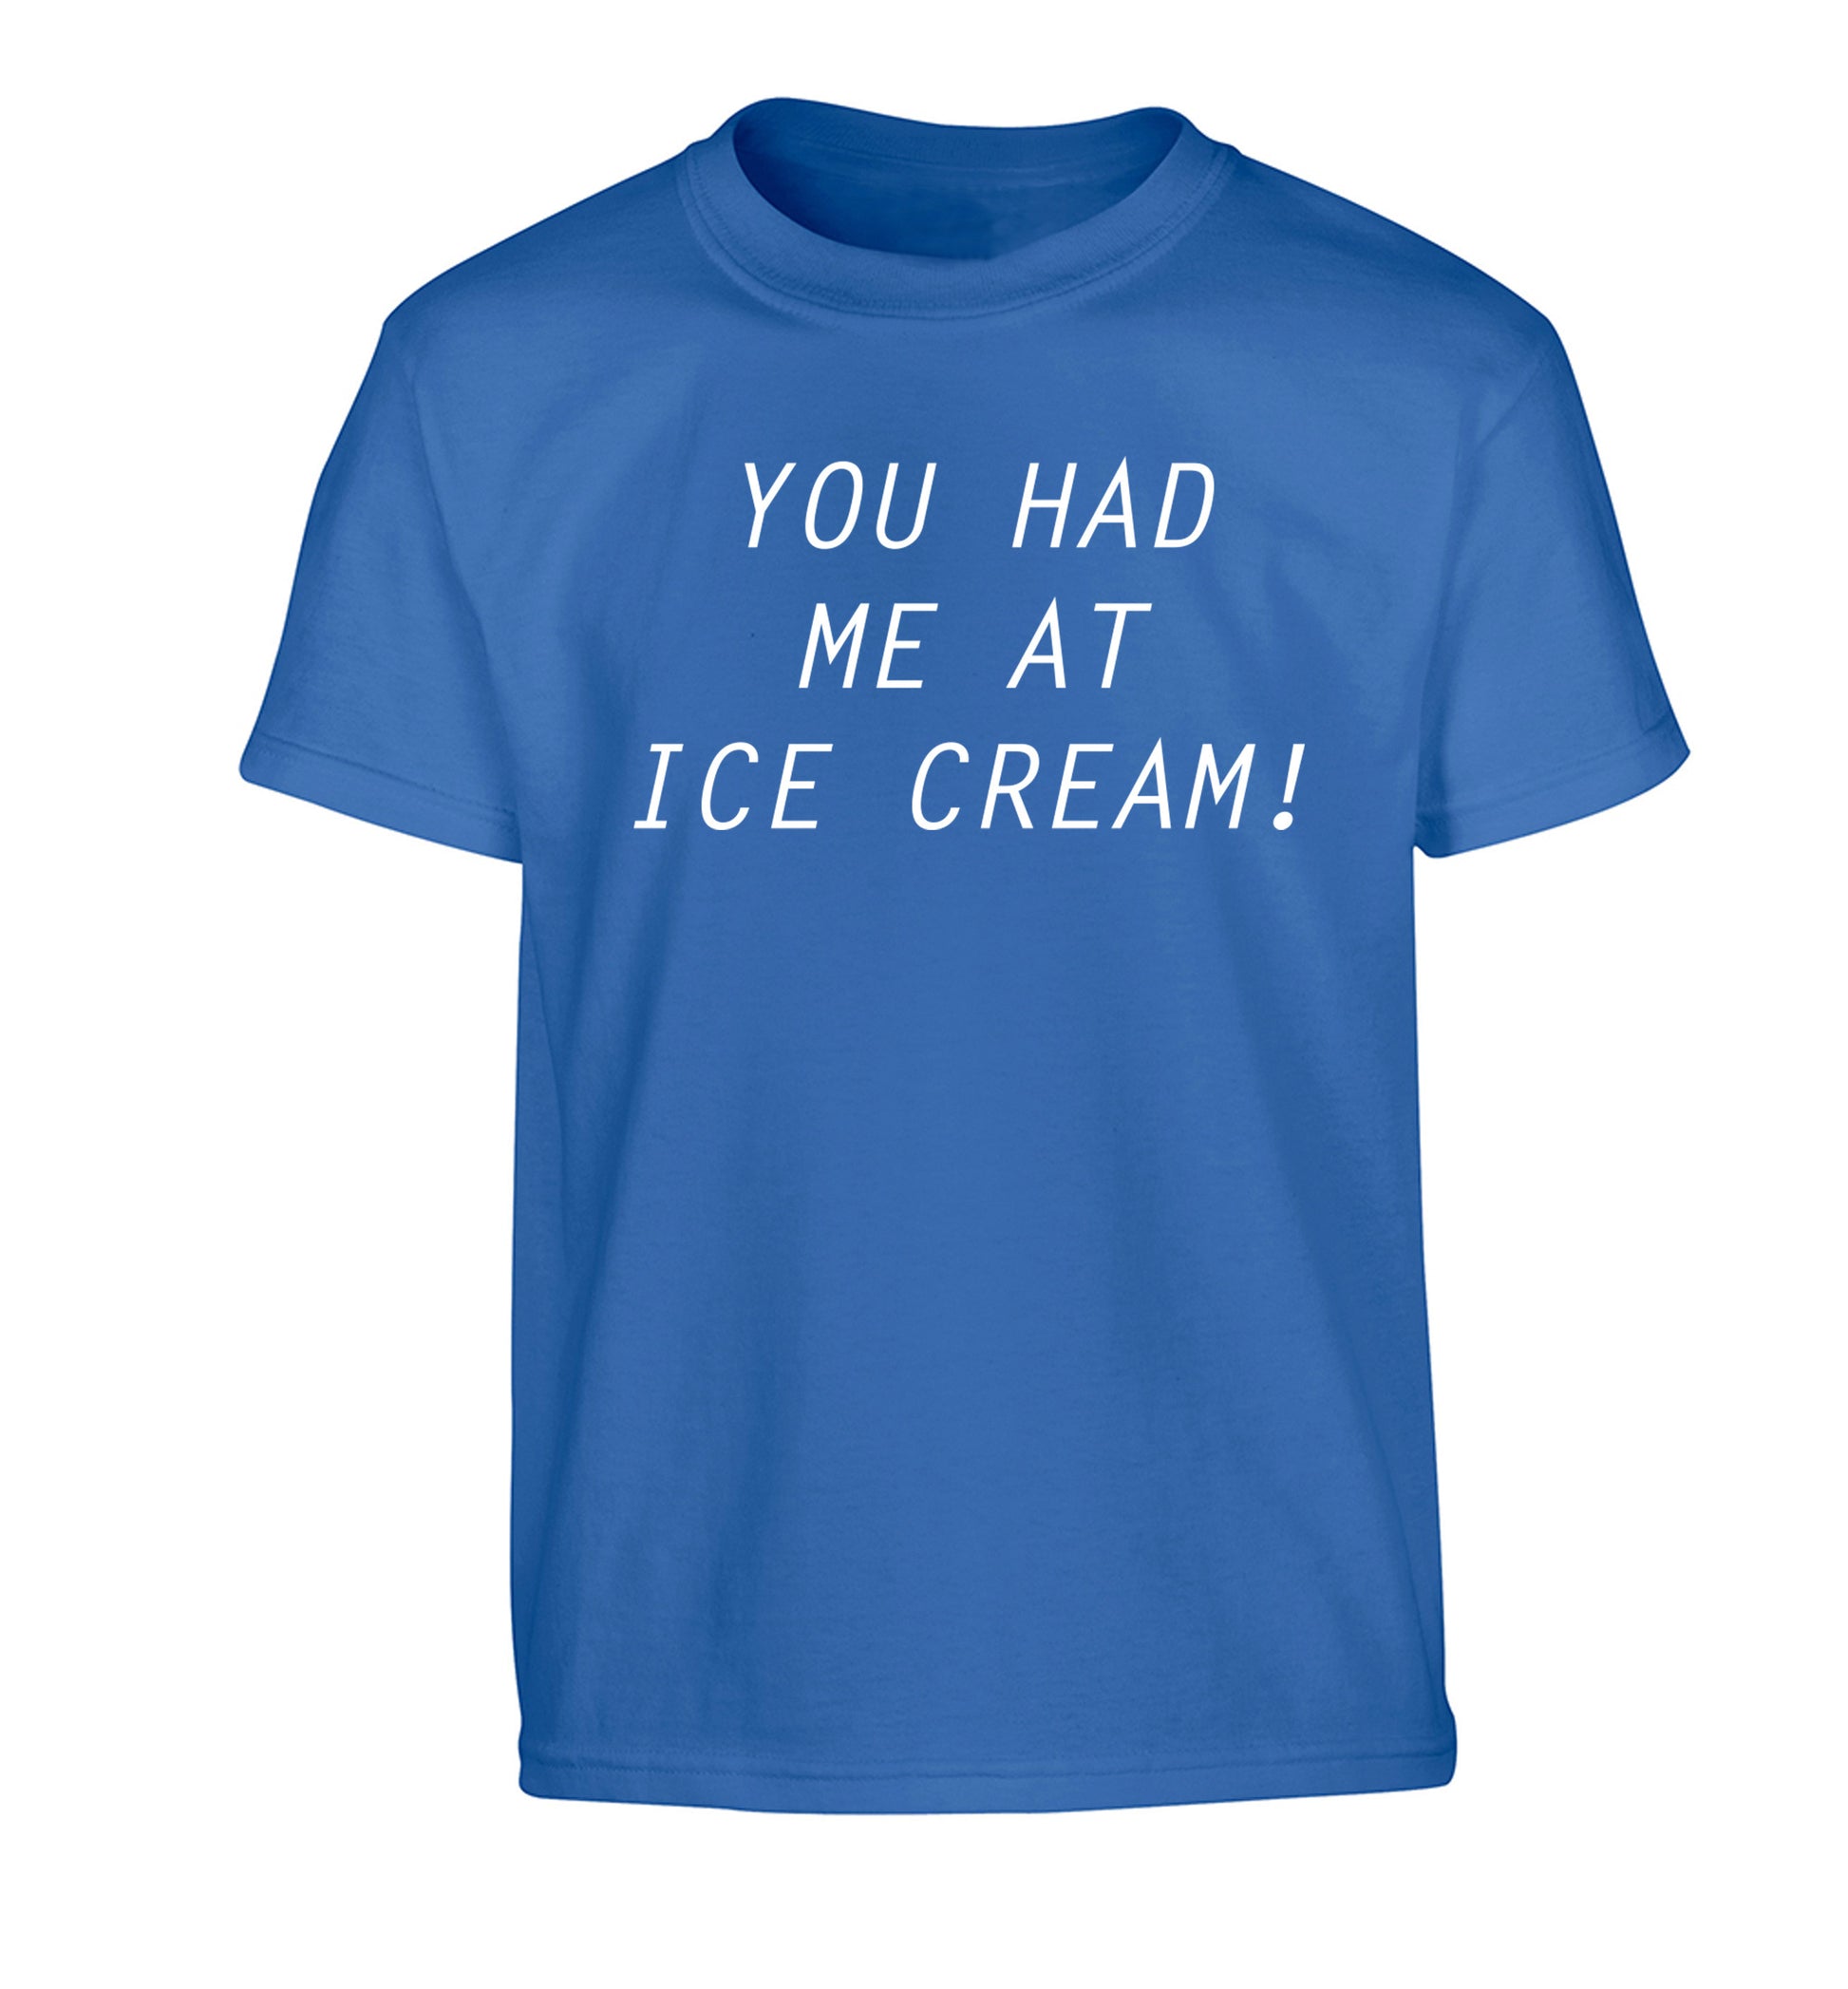 You had me at ice cream Children's blue Tshirt 12-14 Years